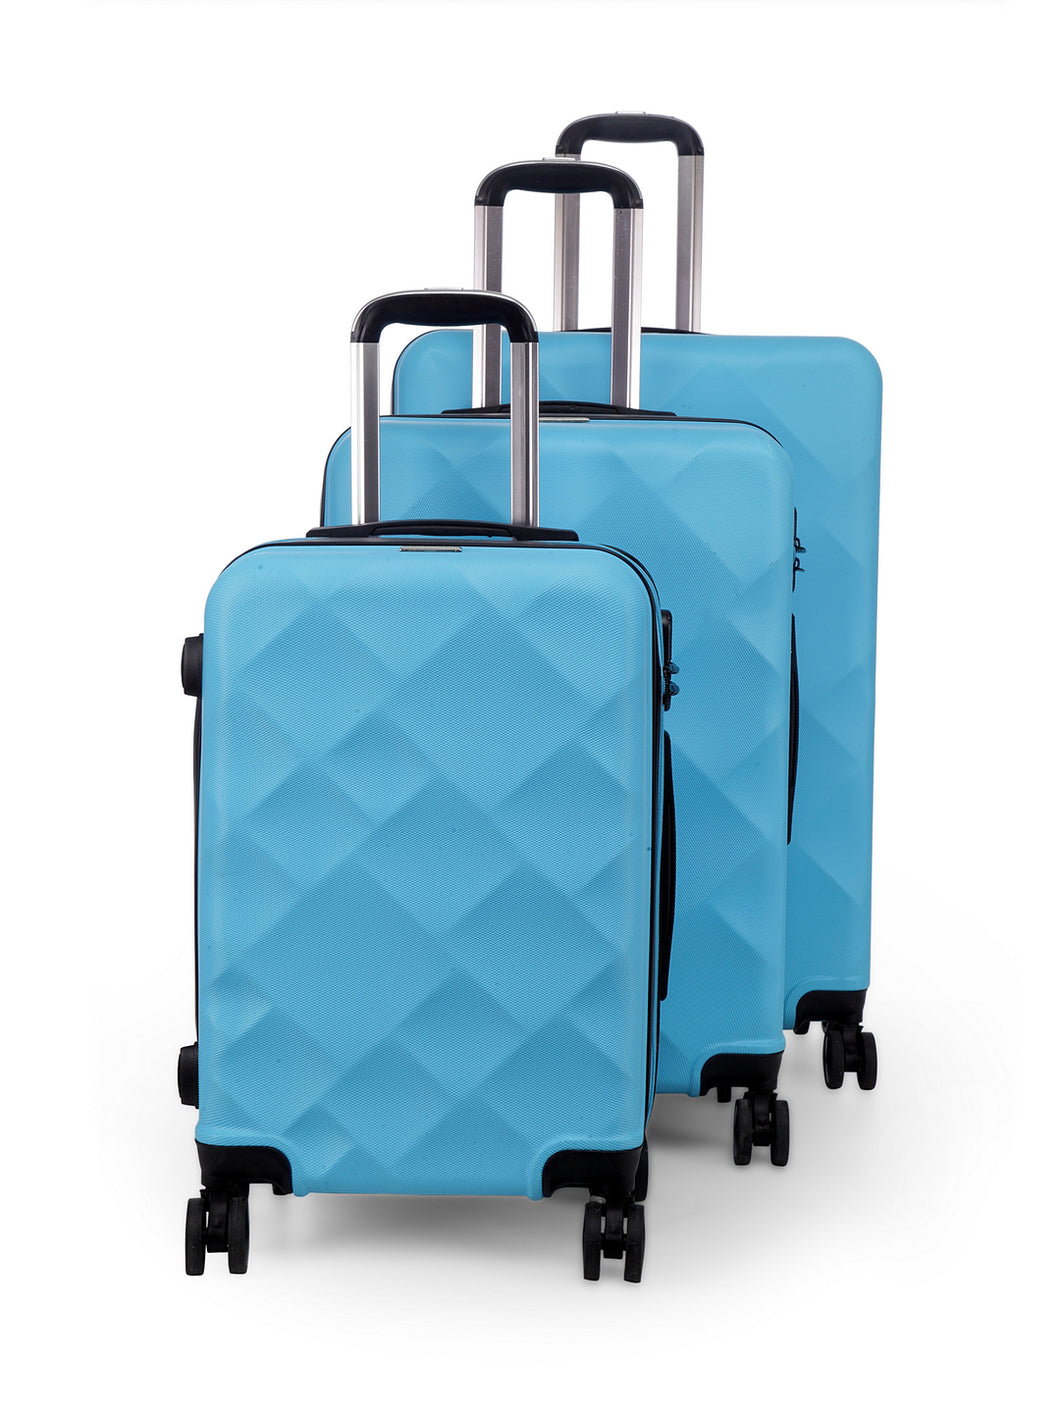 Unisex Set of 3 Blue Textured Hard-Sided Trolley Suitcases